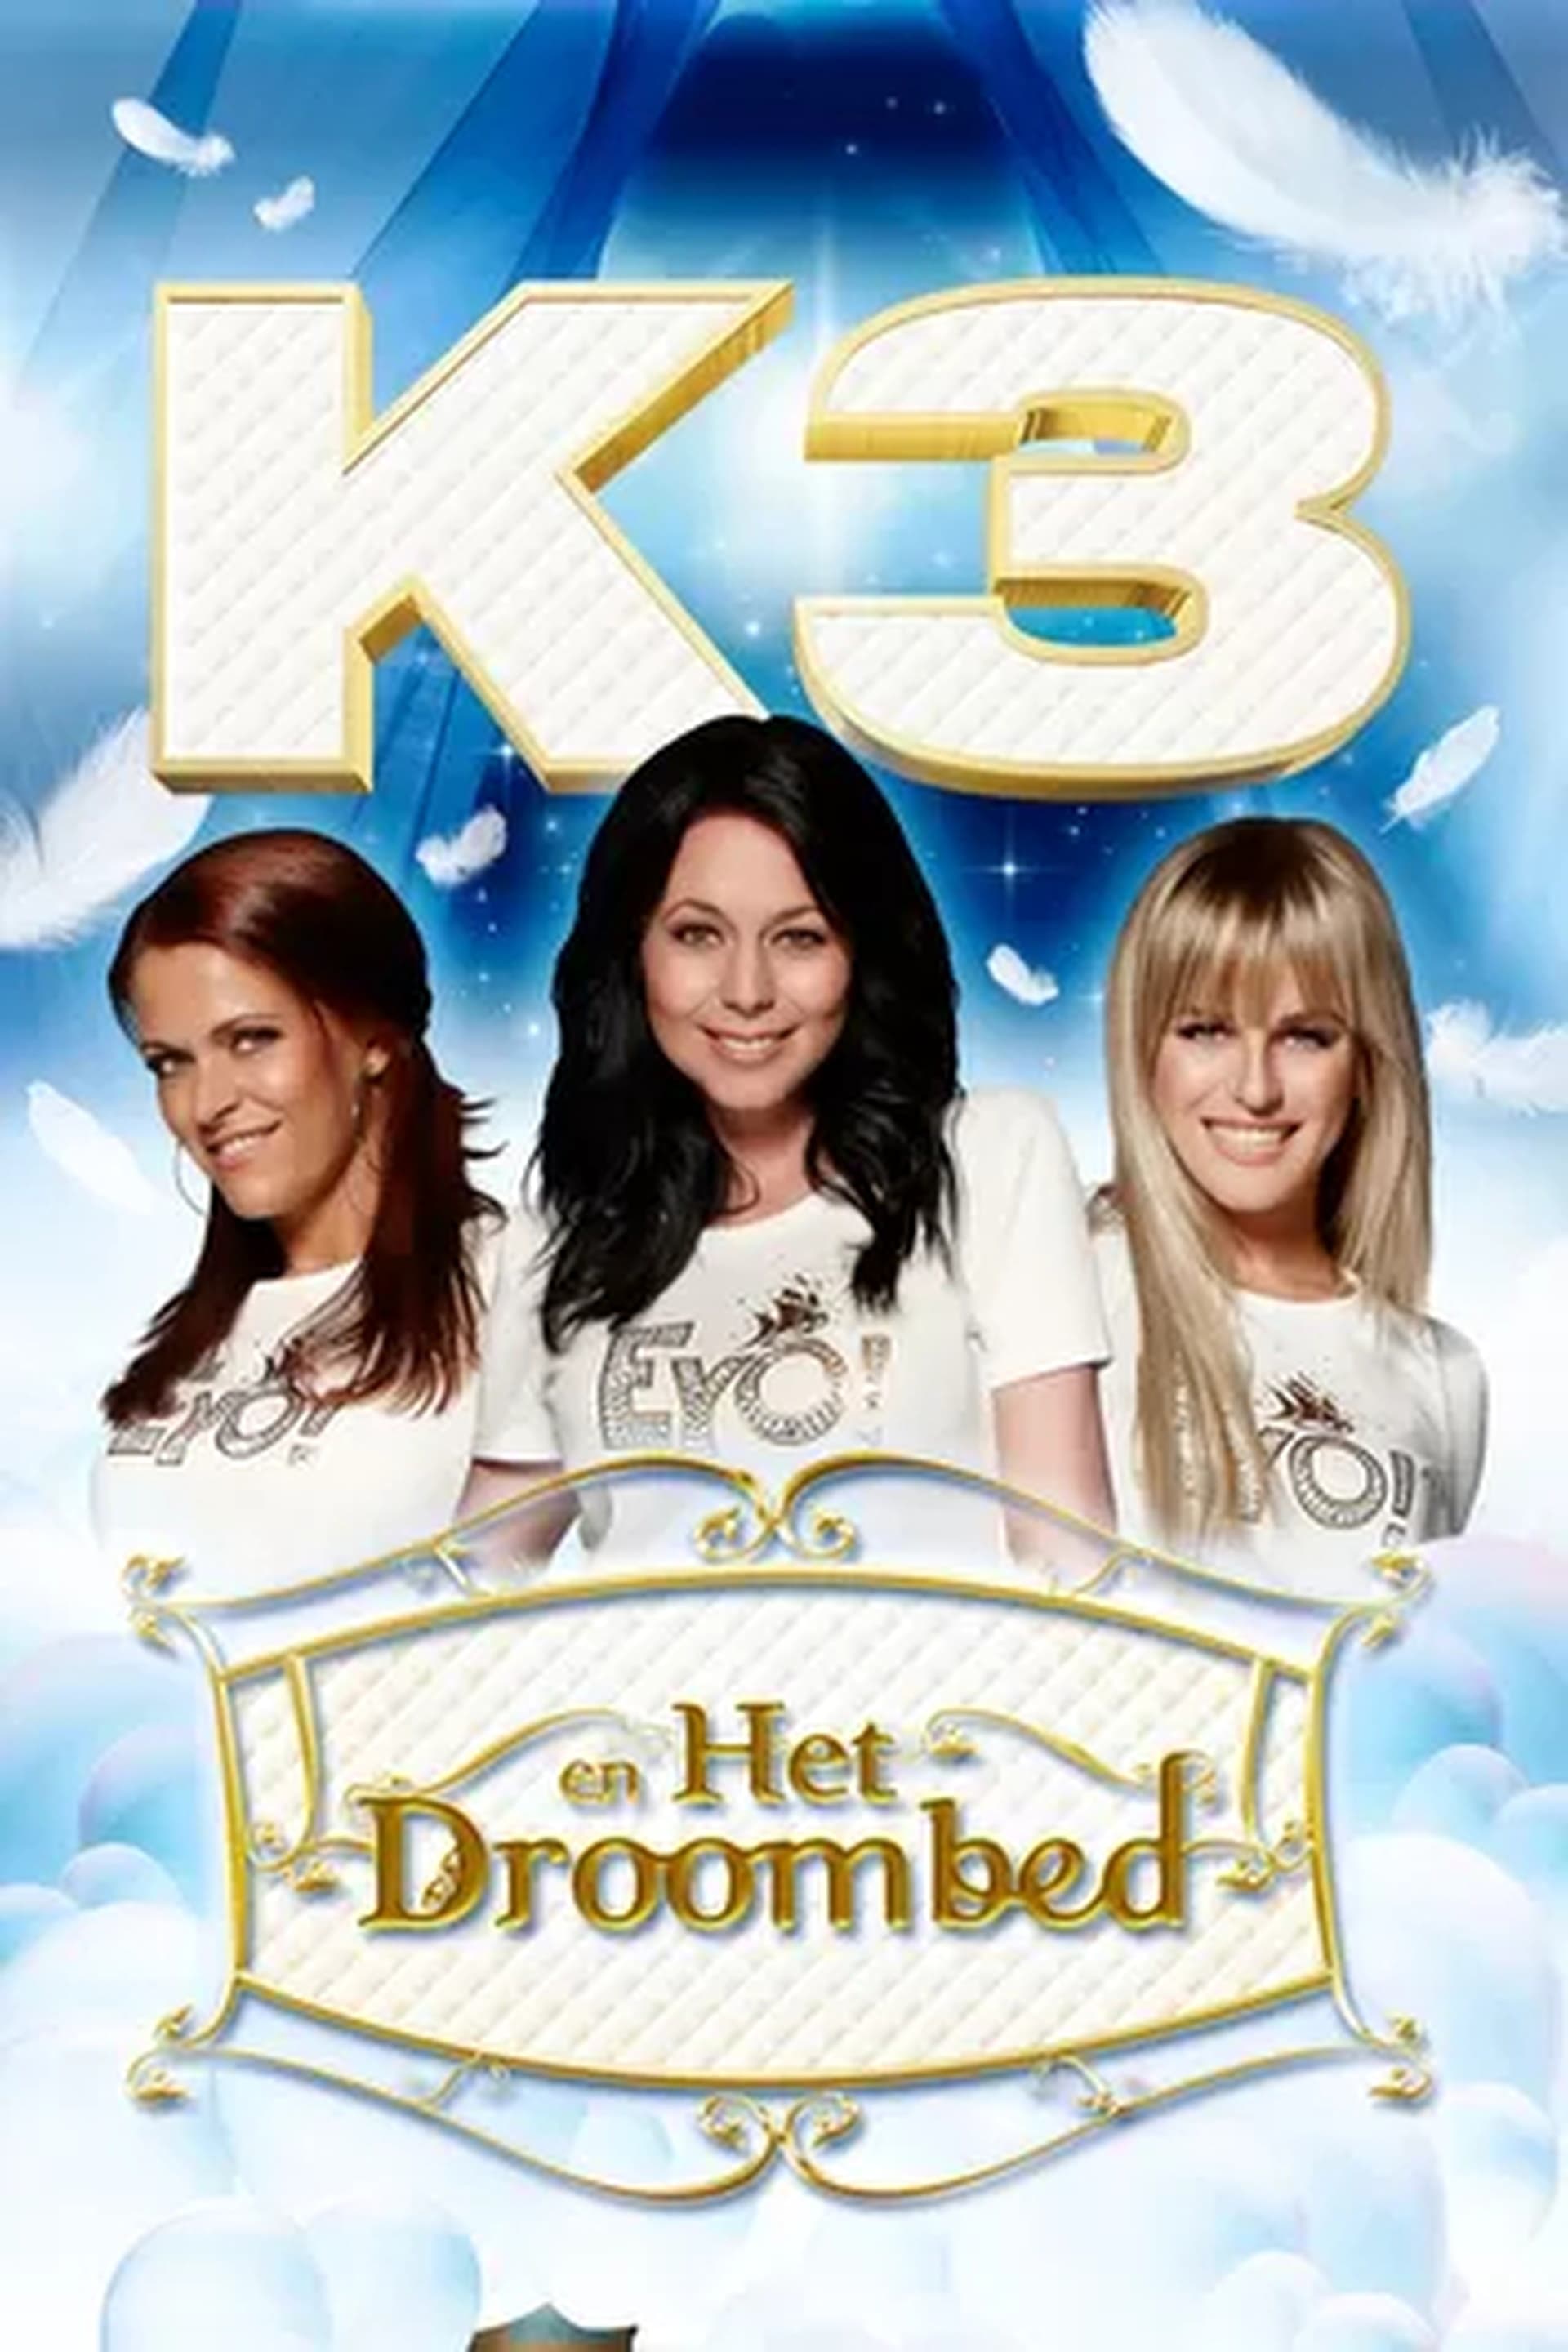 K3 and the dreambed